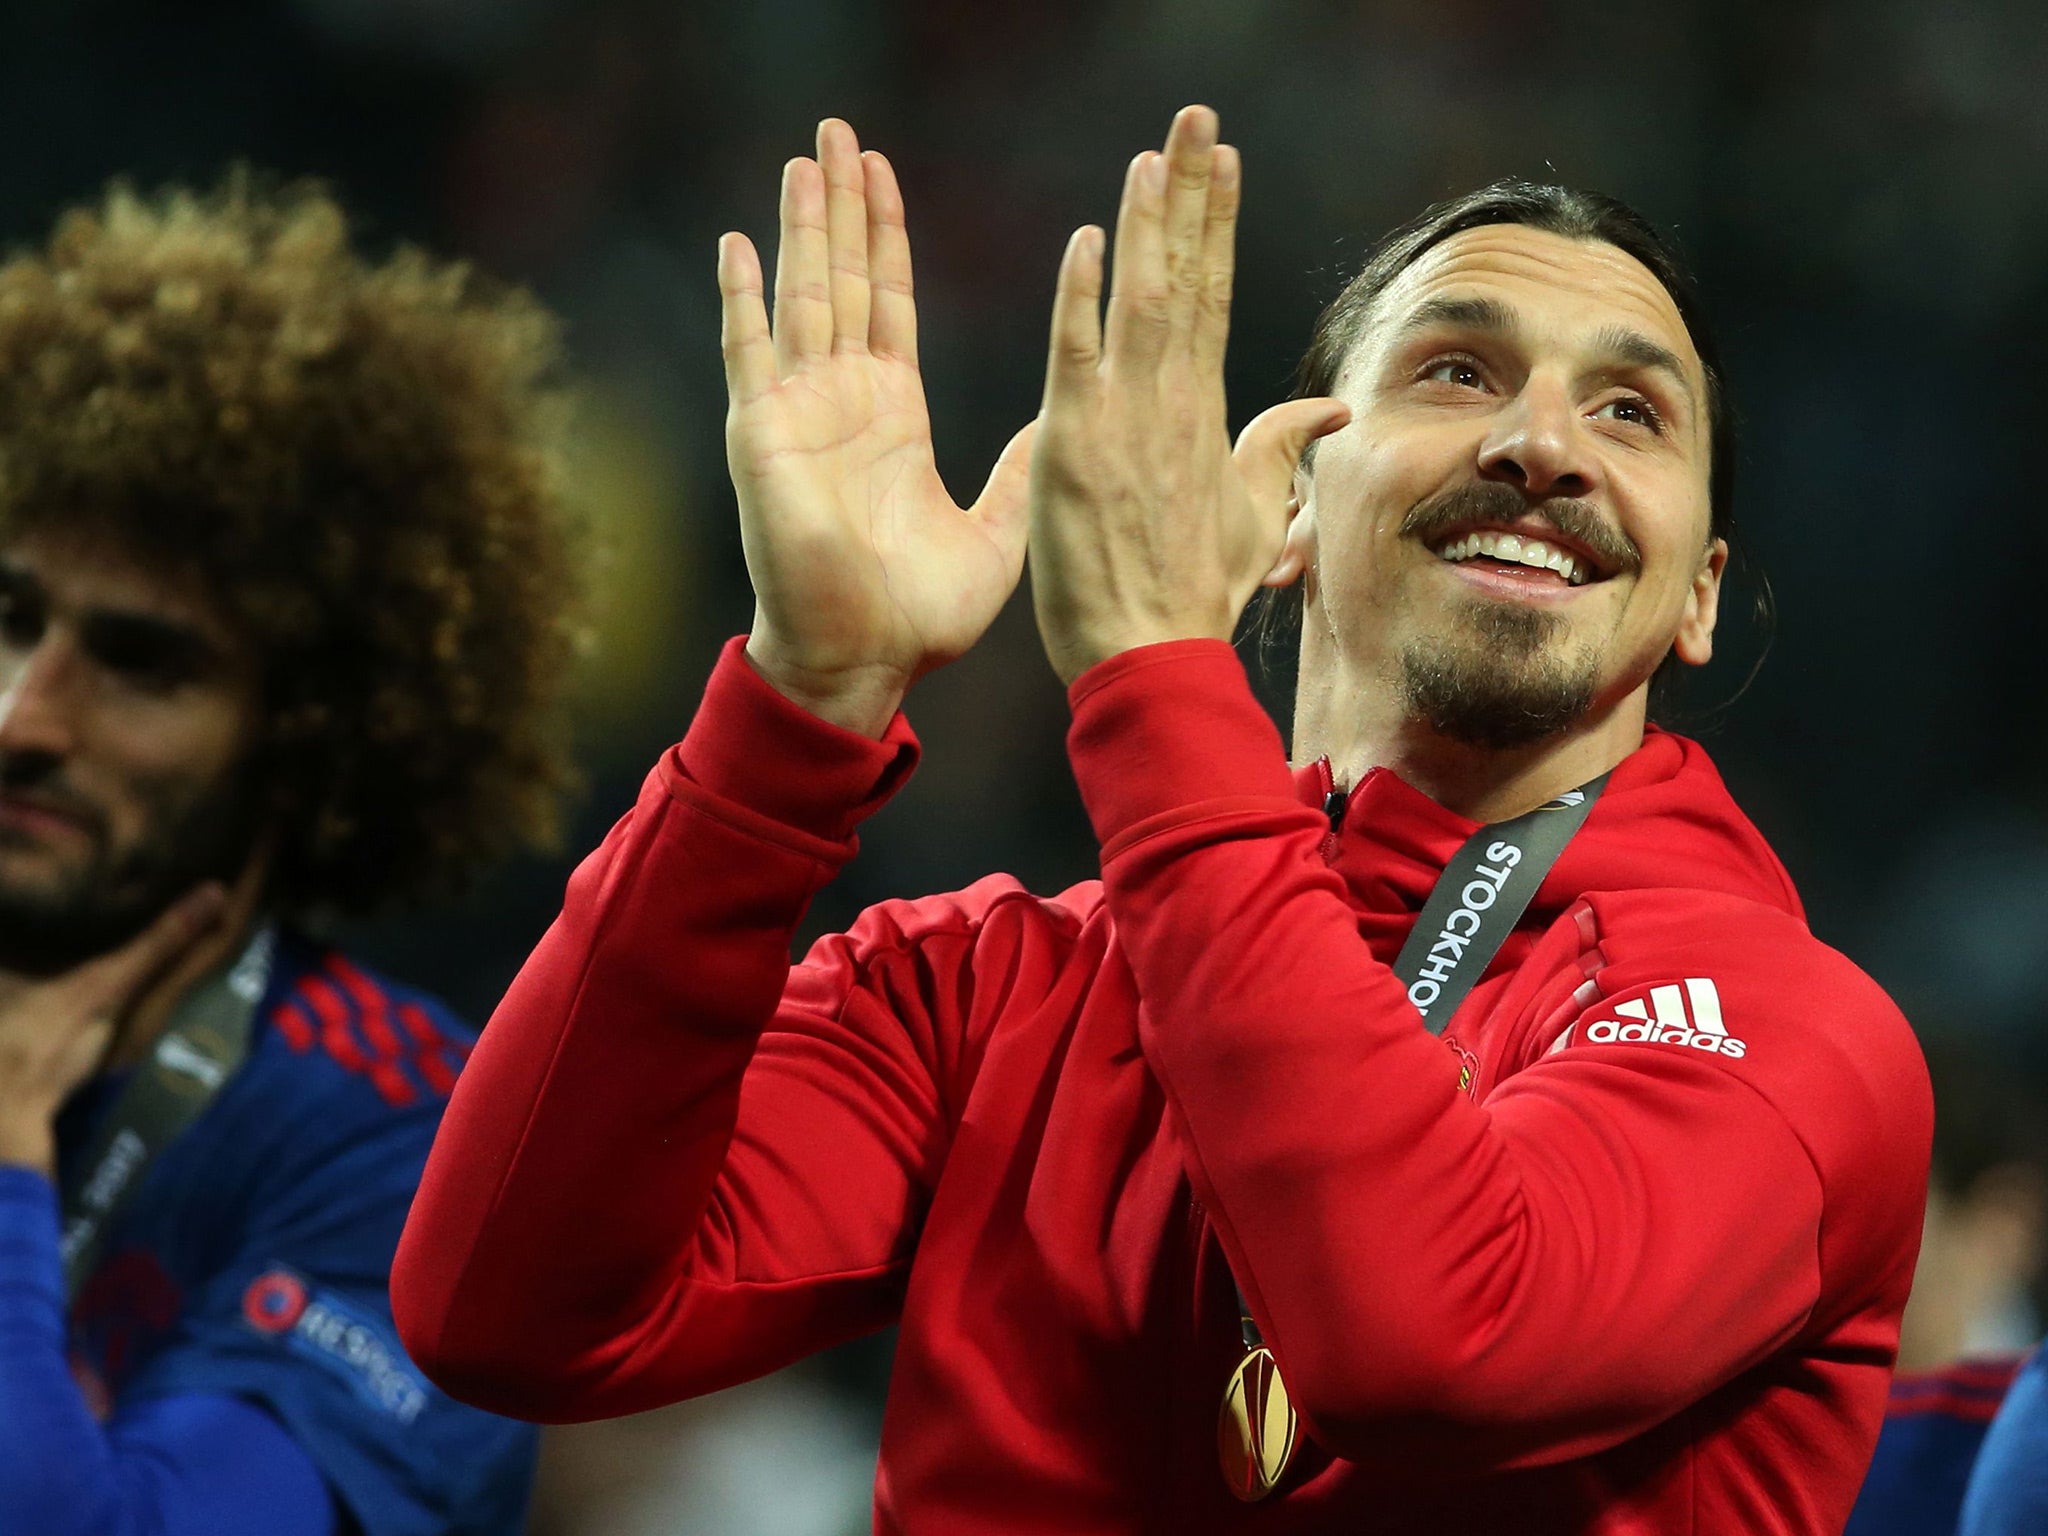 Zlatan Ibrahimovic's contract at Manchester United expired in June